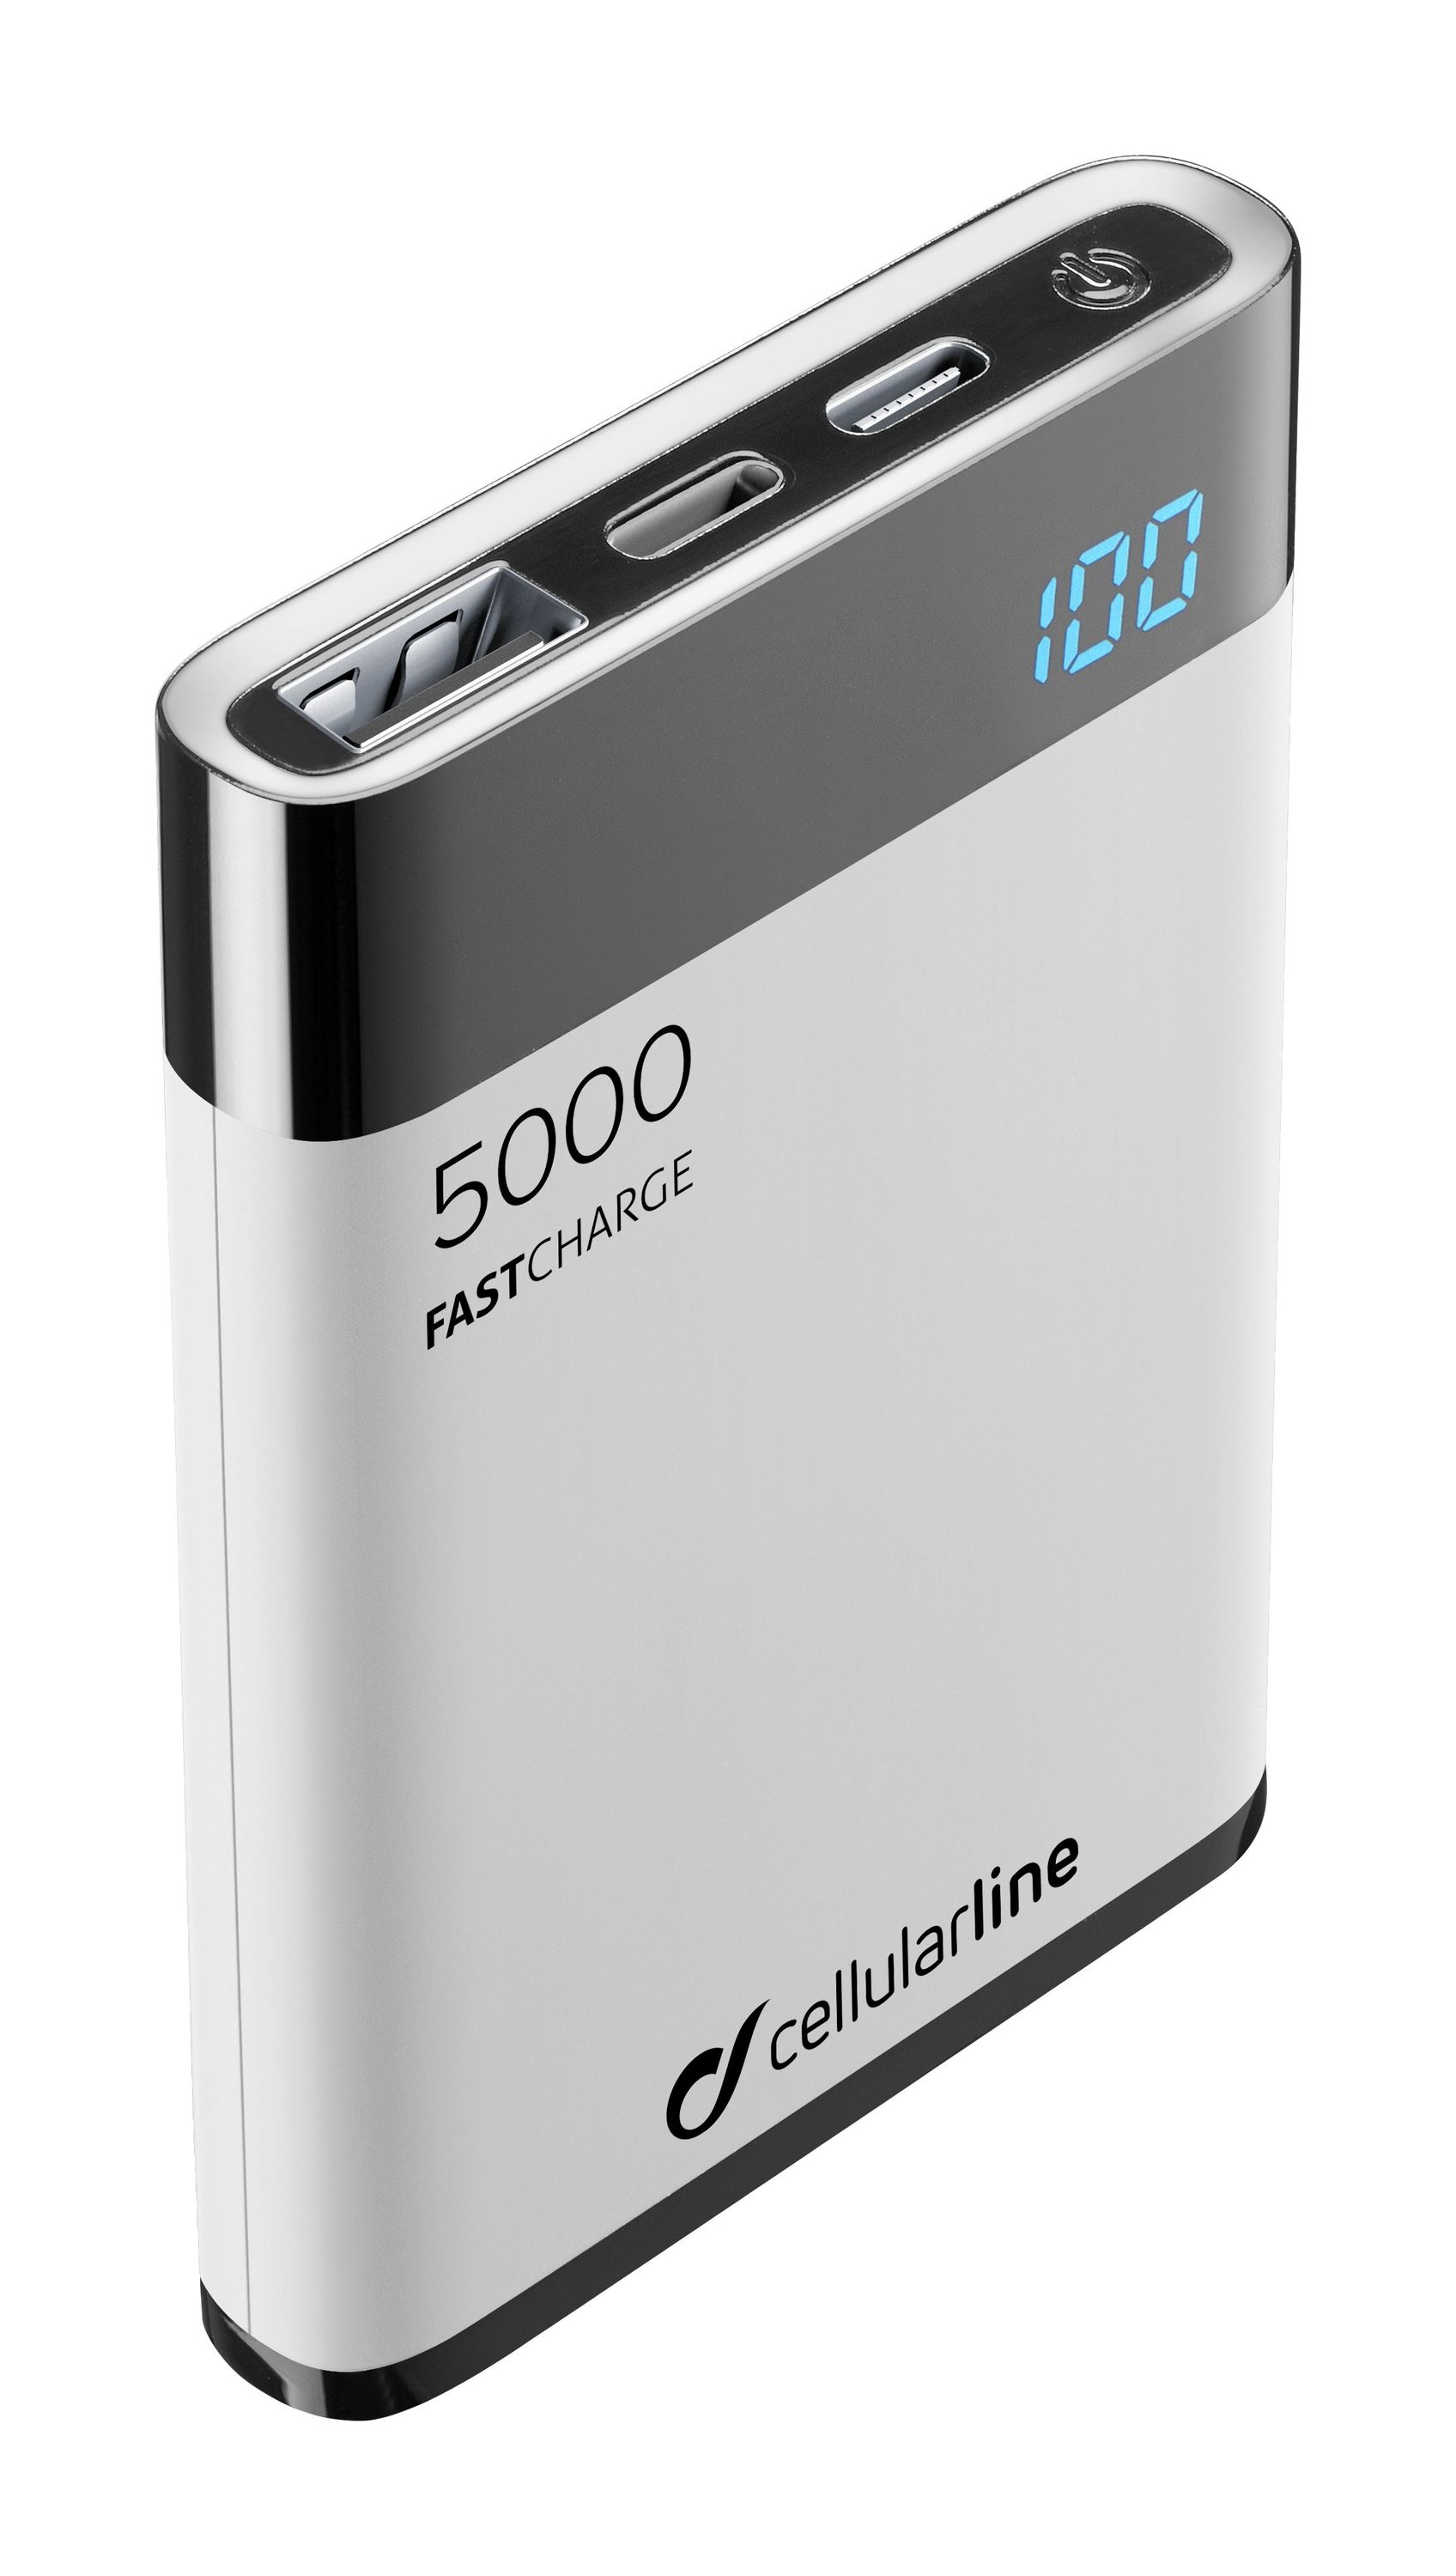 vrouw Systematisch Vervolg Power Bank MANTA 5000 - iPhone | Portable Battery Chargers | Charge and  utility | CellularLine Site DE